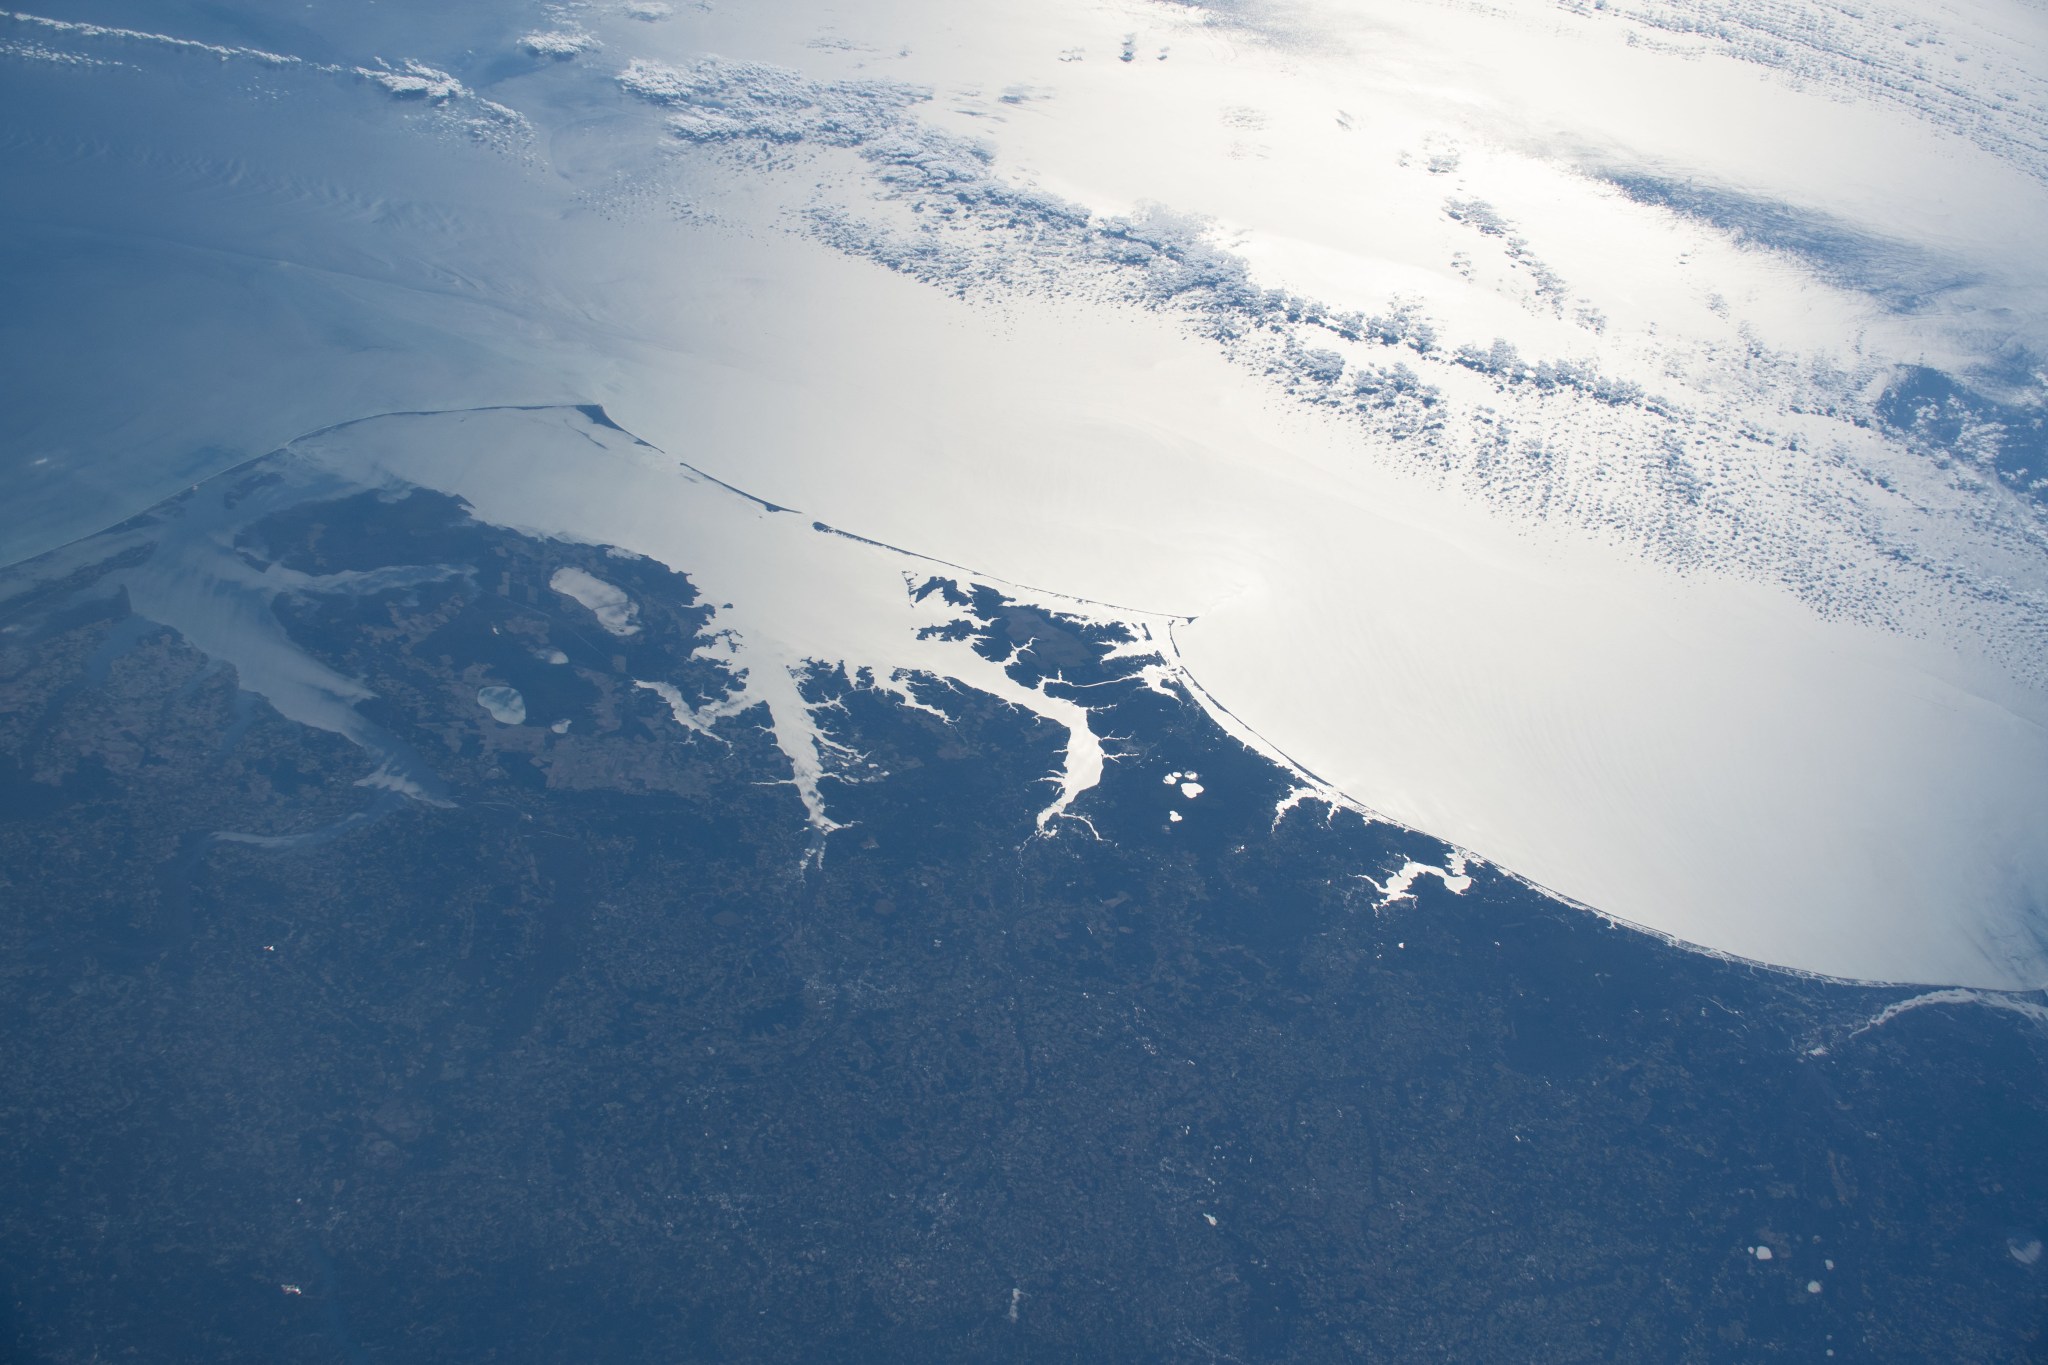 The gleaming Atlantic coast of North Carolina, from the cities of Kitty Hawk (far left) to Wilmington (far right), is pictured from the International Space Station as it orbited 261 miles above the eastern United States.